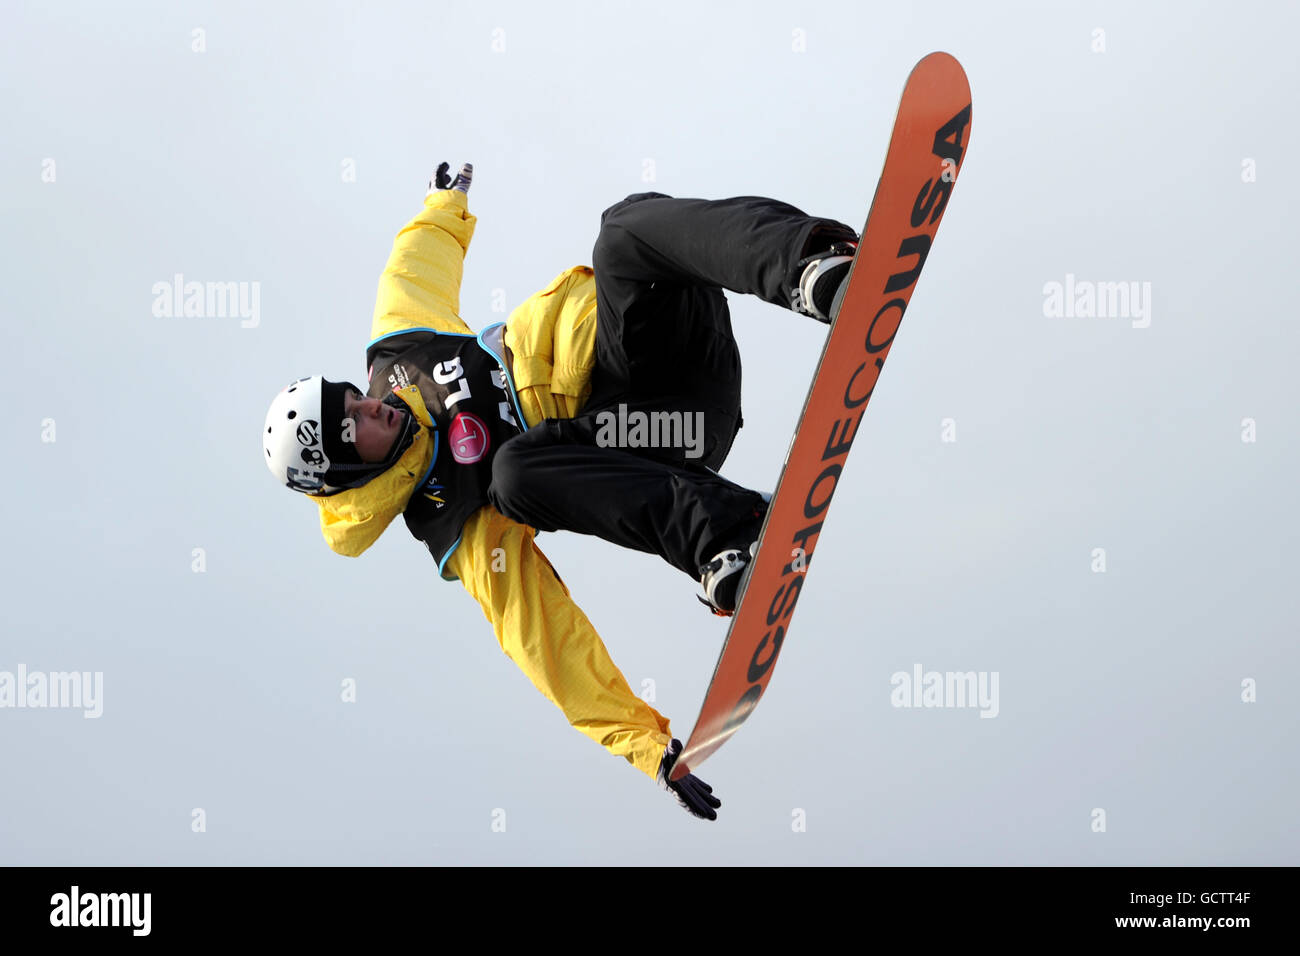 Sam Cullum of Great Britain during the LG Snowboard FIS World Cup in London Stock Photo